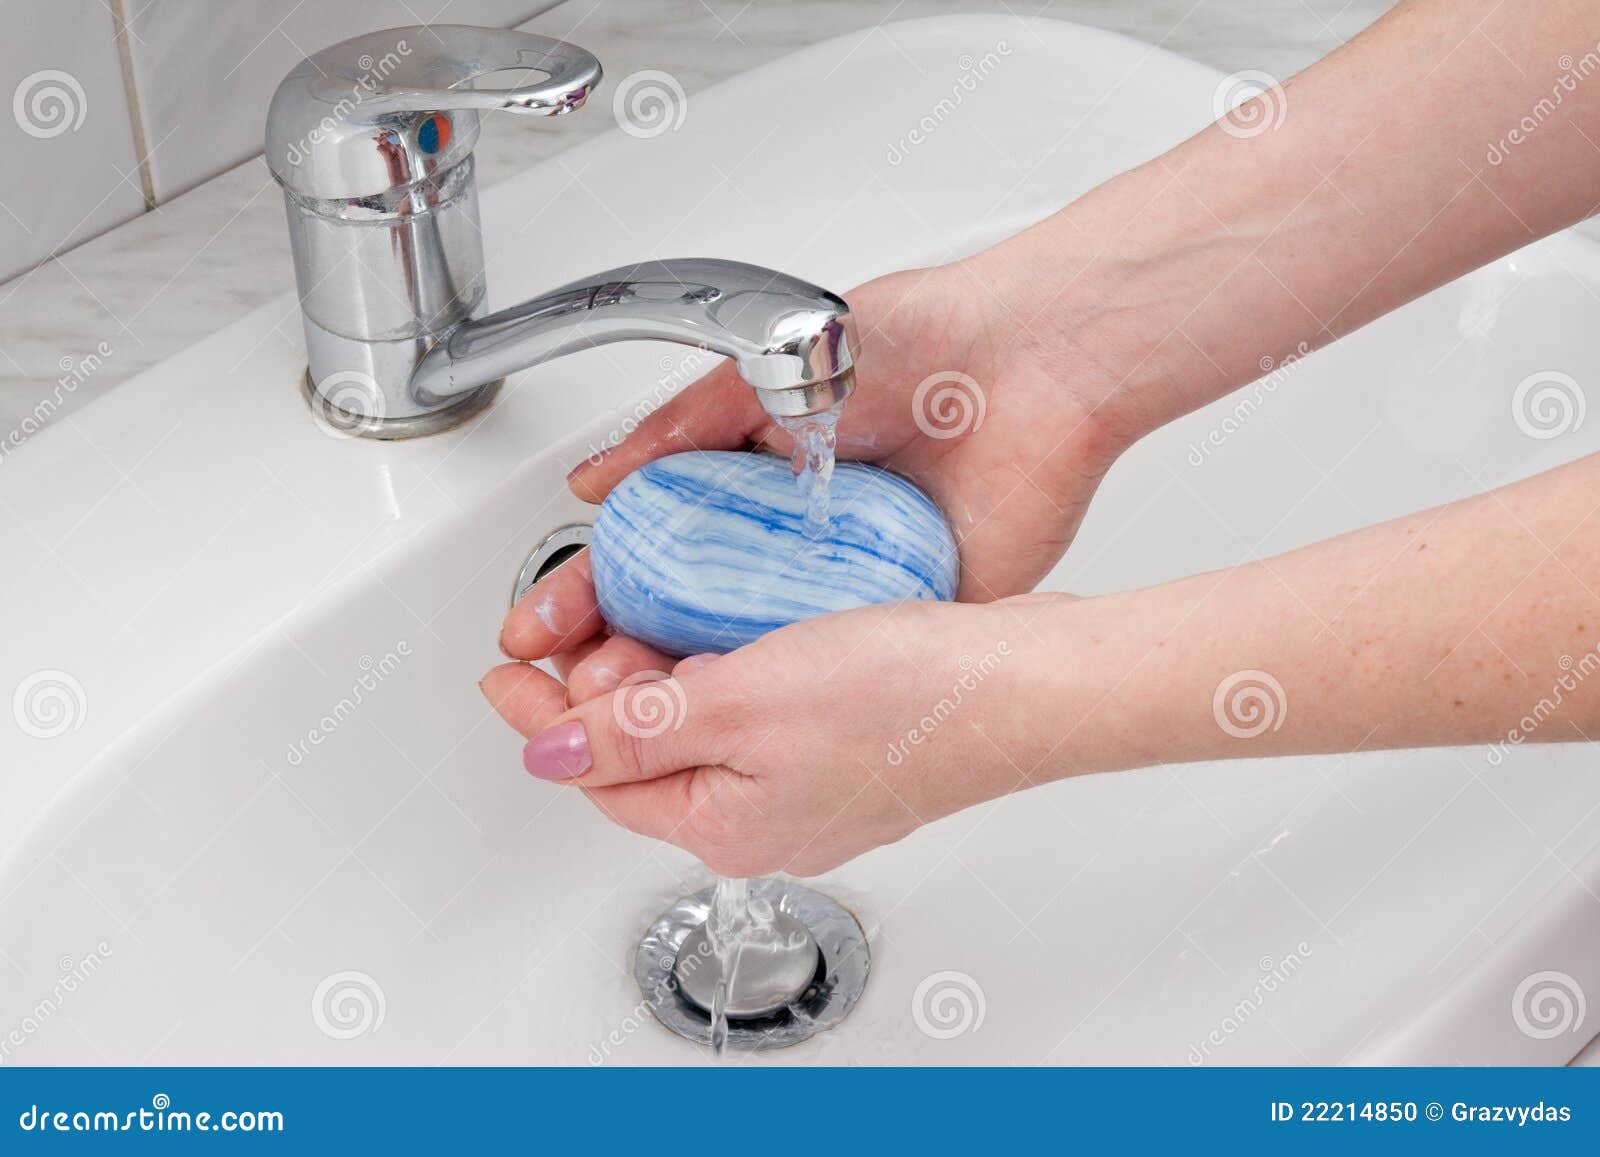 Hands Wash With Soap Stock Photo - Image: 22214850